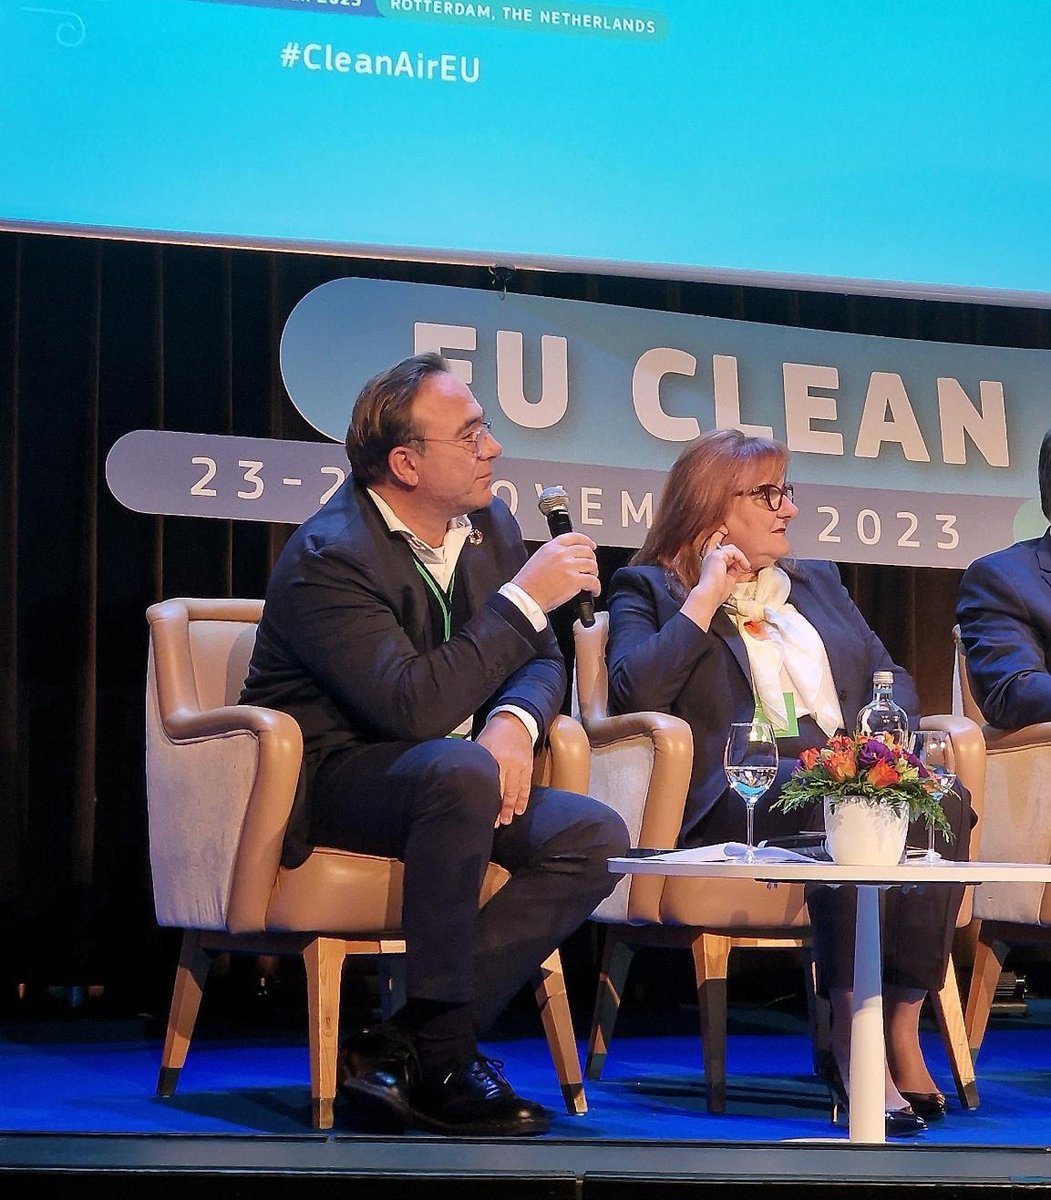 Was a pleasure to discuss on the impact of maritime transport to air pollution. We must address the sector's SOx and NOx emissions, invest in innovation for clean engines and vessels & timely deliver stricter EU air quality rules with a robust enforcement mechanism. #CleanAirEU